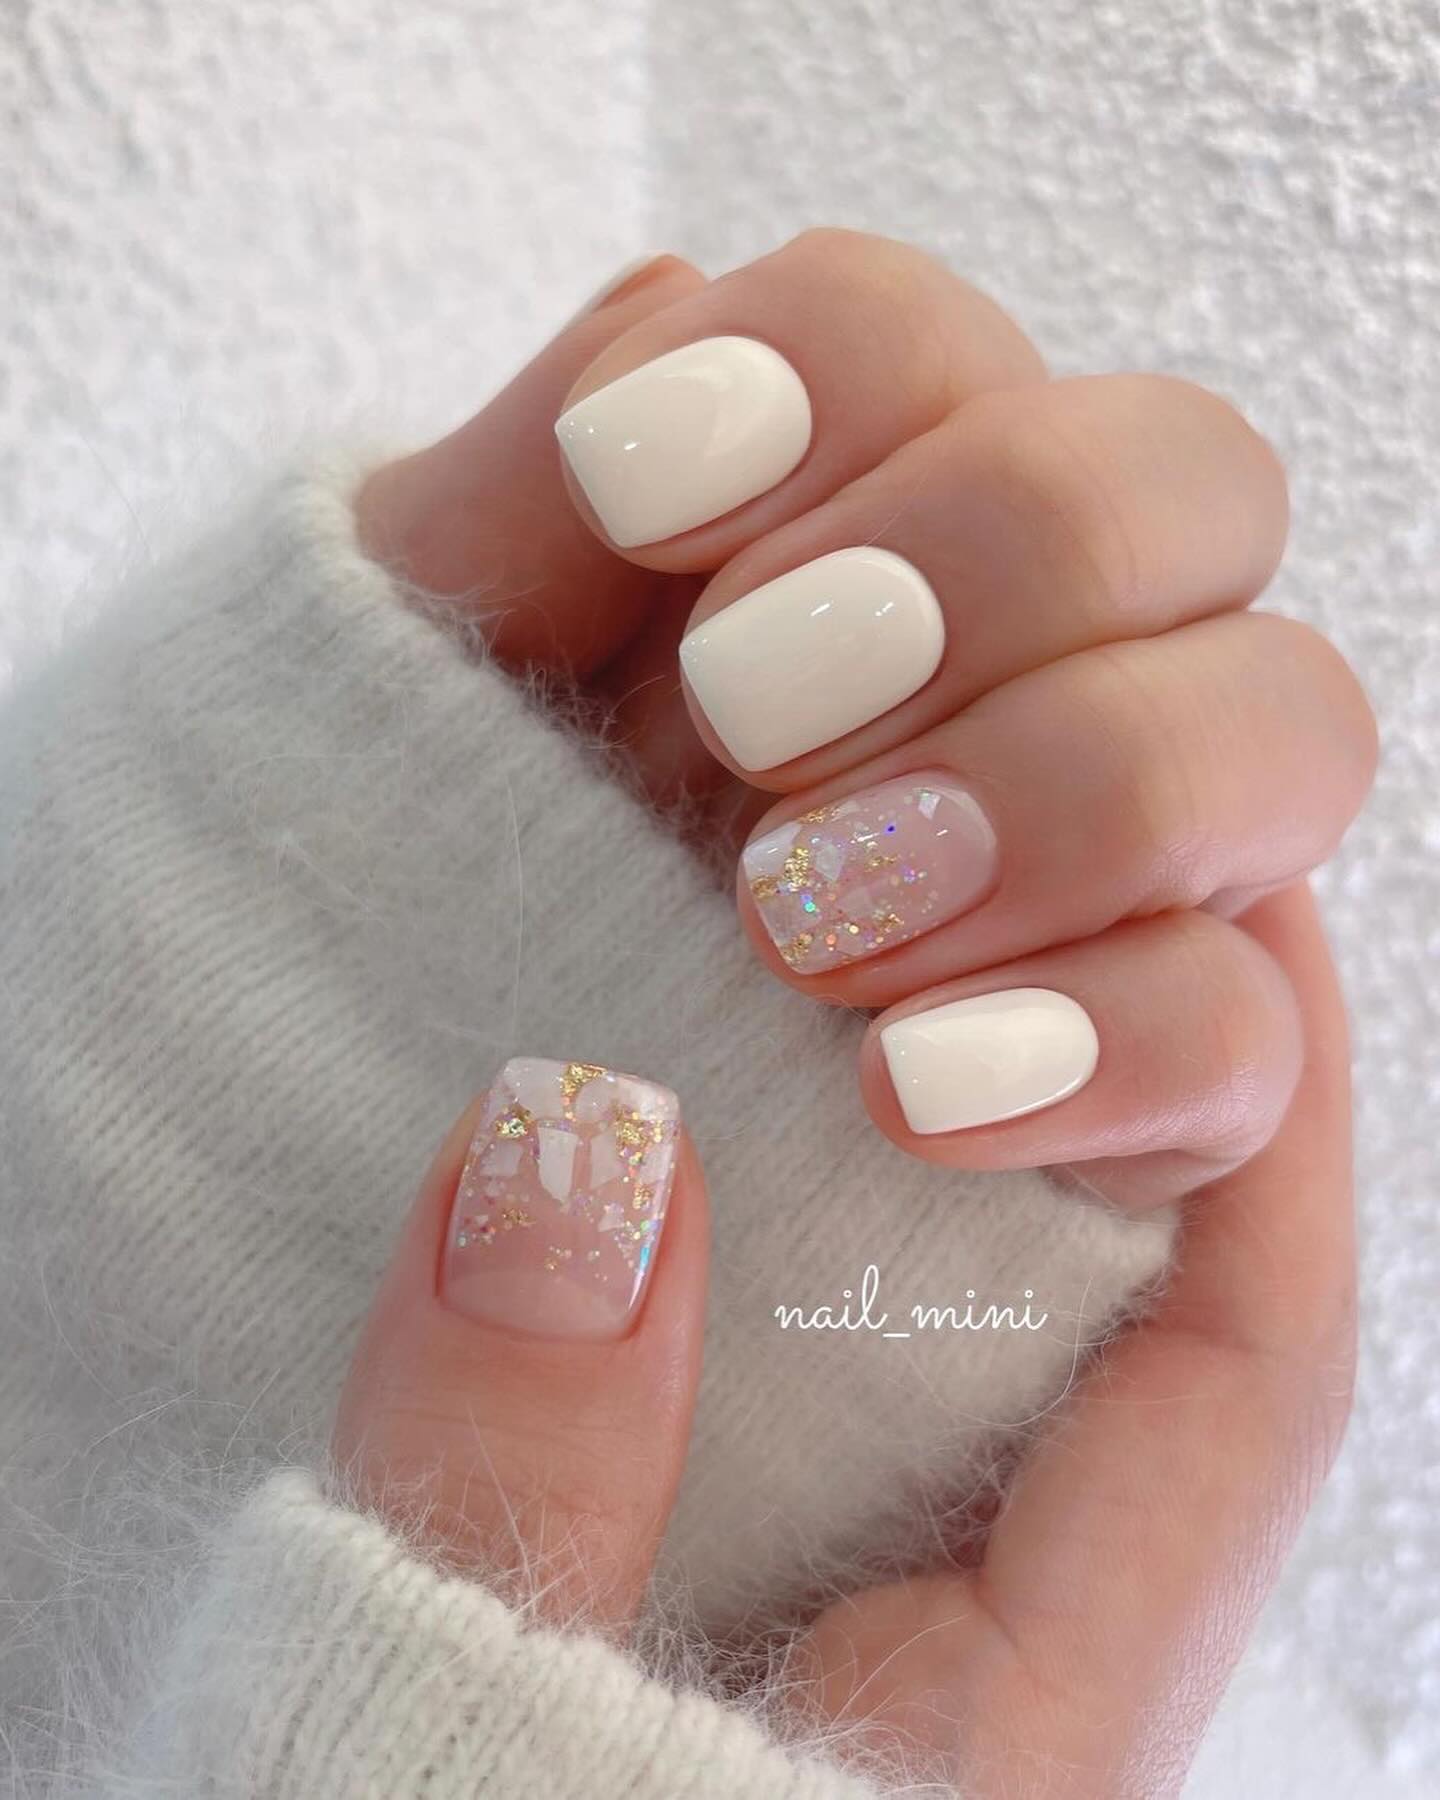 100+ Short Nail Designs You’ll Want To Try This Year images 24